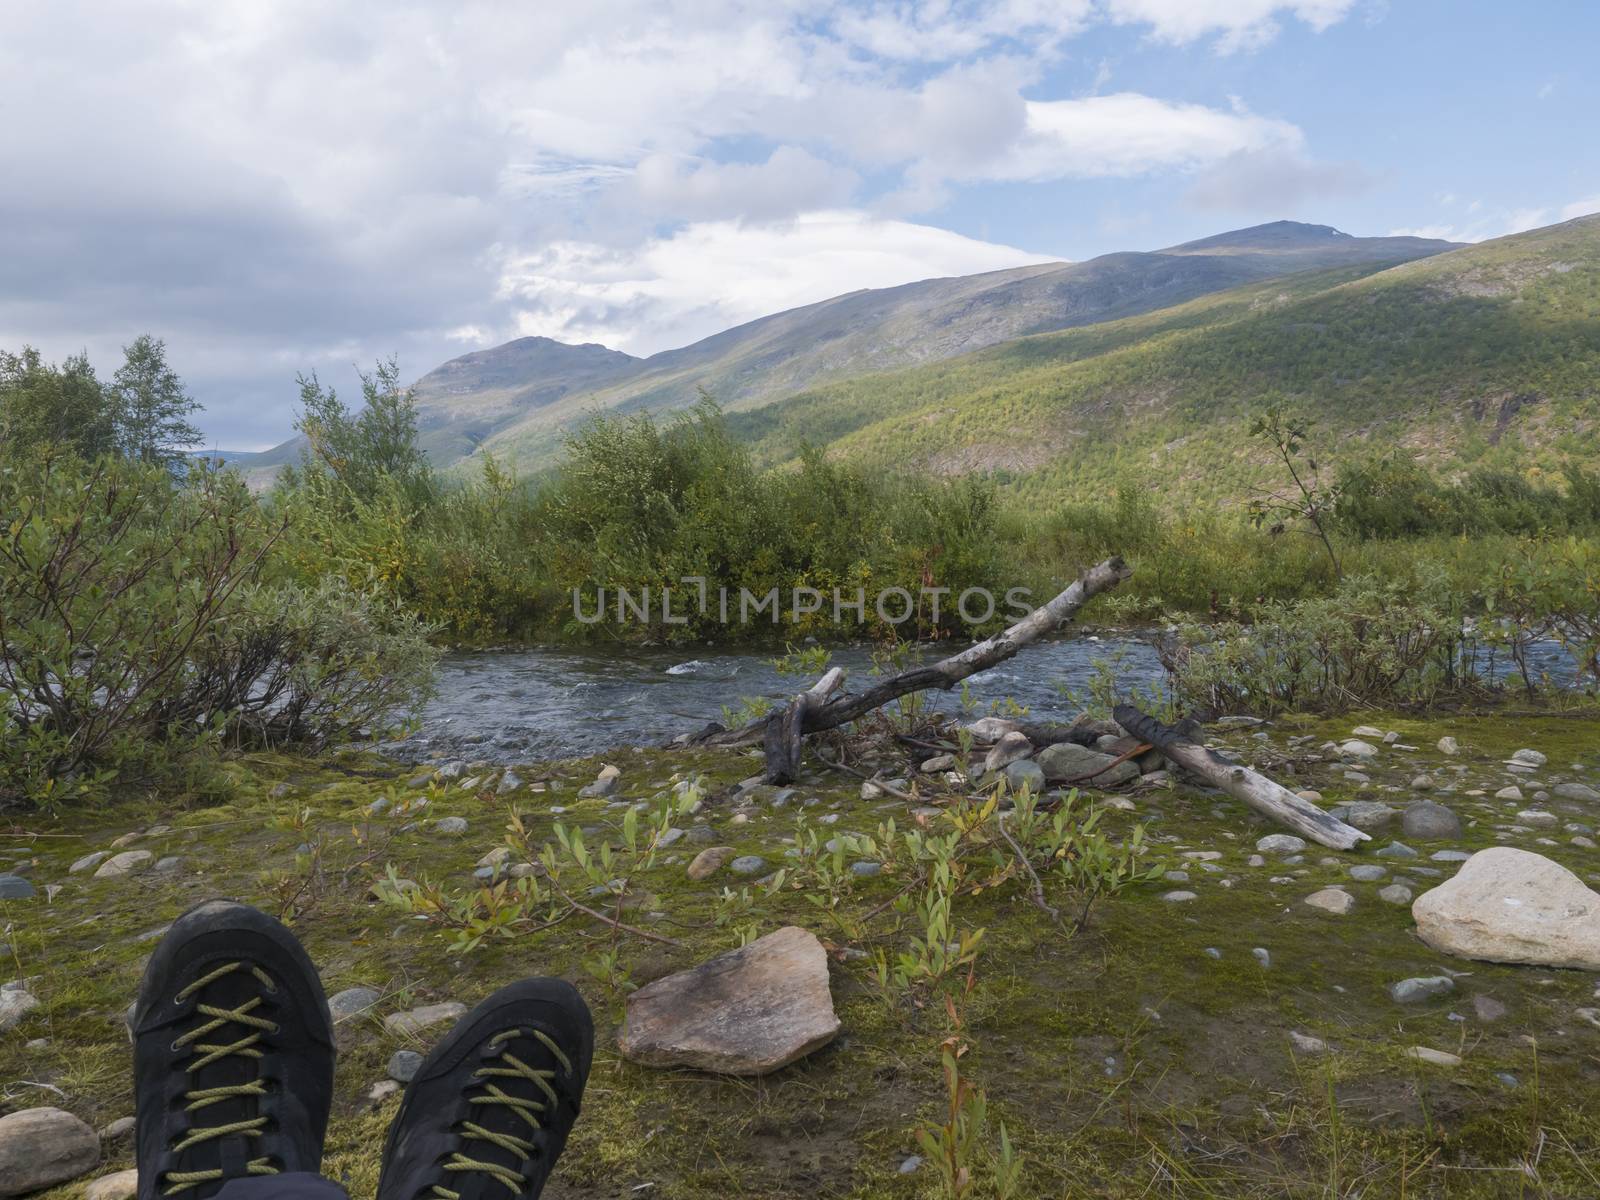 hiking boots with view on wild river with birch tree forest and mountains in golden light. Lapland nature landscape in summer, moody sky